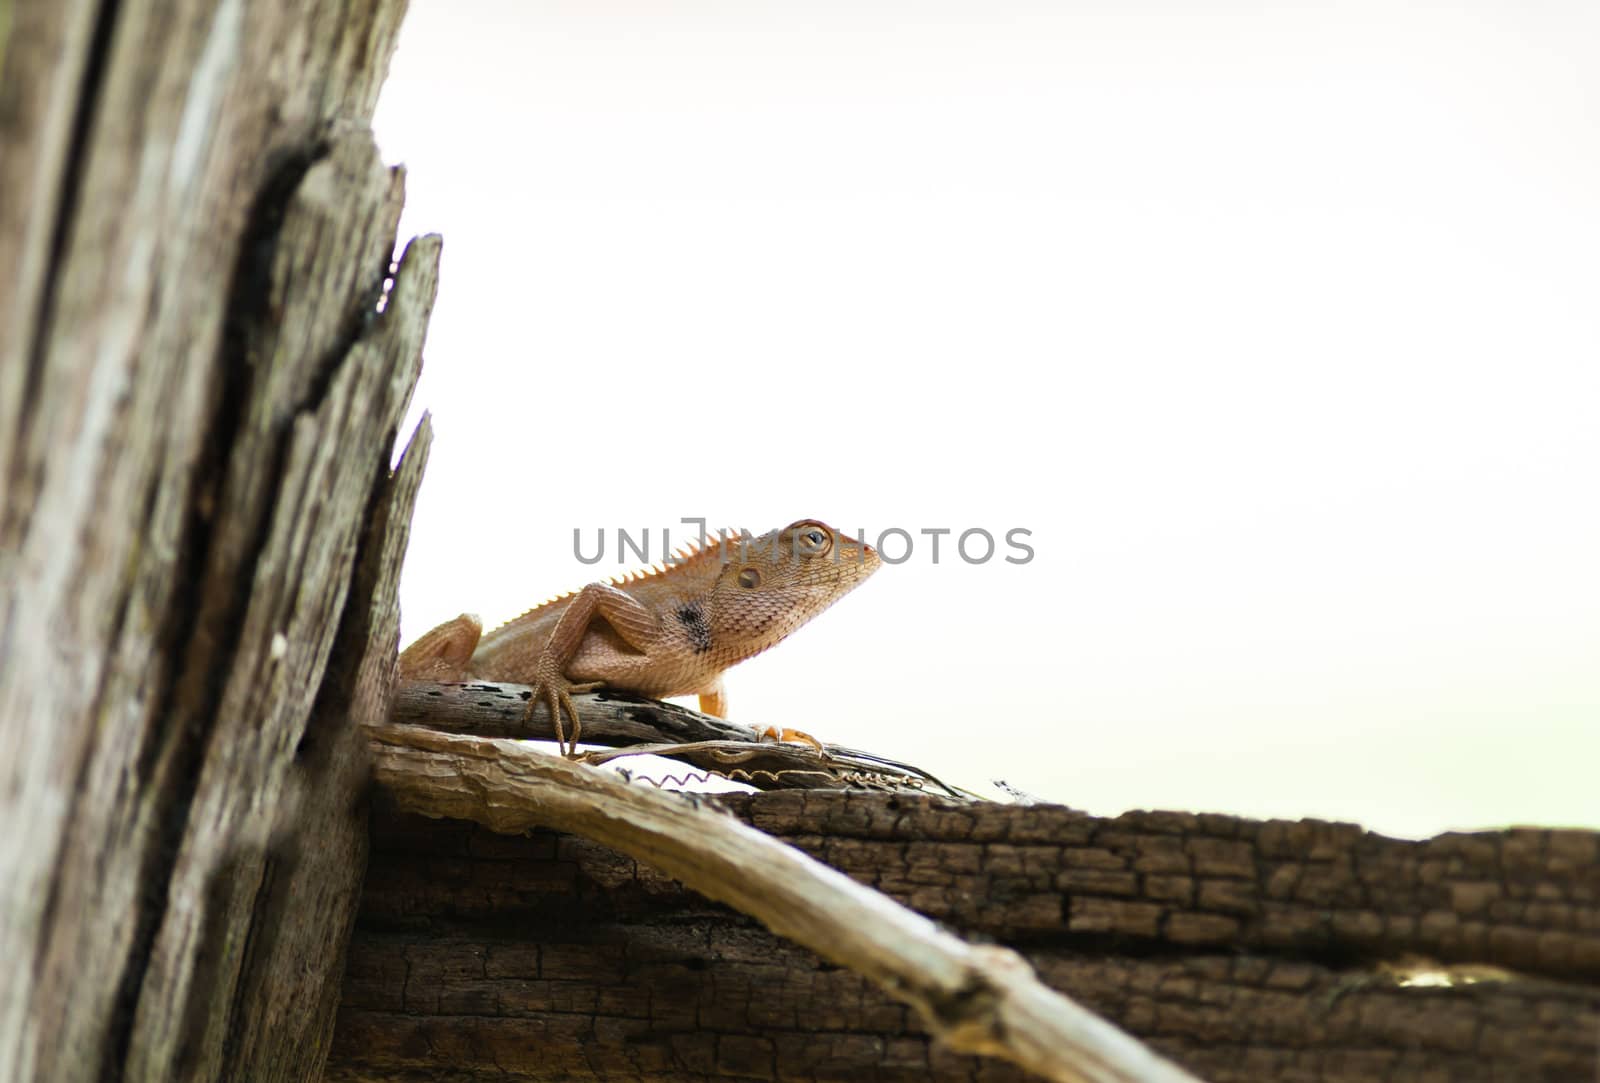 lizard hanging on wood in white background